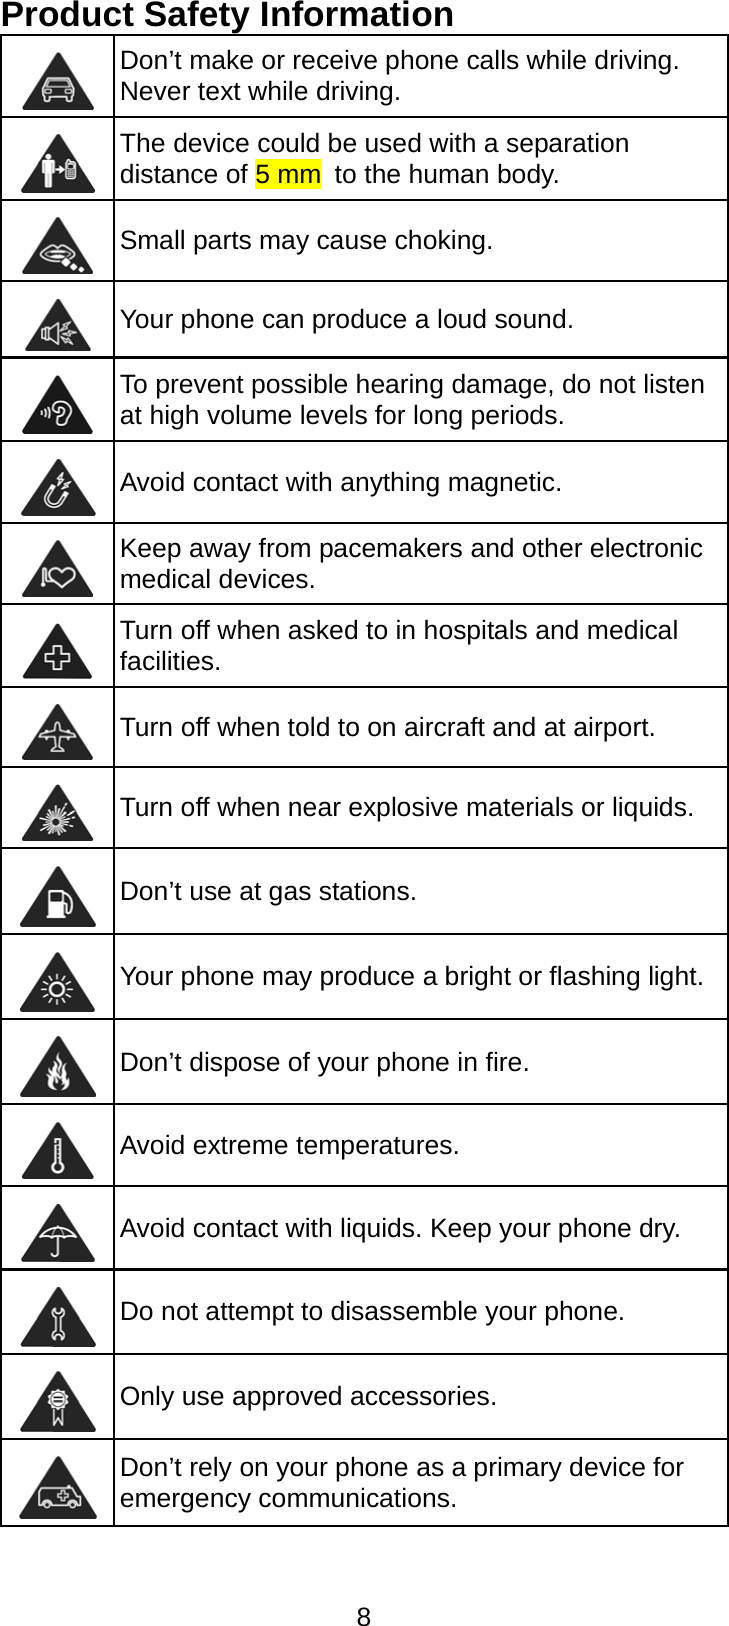  8 Product Safety Information  Don’t make or receive phone calls while driving. Never text while driving.  The device could be used with a separation distance of 5 mm to the human body.  Small parts may cause choking.  Your phone can produce a loud sound.  To prevent possible hearing damage, do not listen at high volume levels for long periods.  Avoid contact with anything magnetic.  Keep away from pacemakers and other electronic medical devices.  Turn off when asked to in hospitals and medical facilities.  Turn off when told to on aircraft and at airport.  Turn off when near explosive materials or liquids.  Don’t use at gas stations.  Your phone may produce a bright or flashing light.  Don’t dispose of your phone in fire.  Avoid extreme temperatures.  Avoid contact with liquids. Keep your phone dry.  Do not attempt to disassemble your phone.  Only use approved accessories.  Don’t rely on your phone as a primary device for emergency communications.  